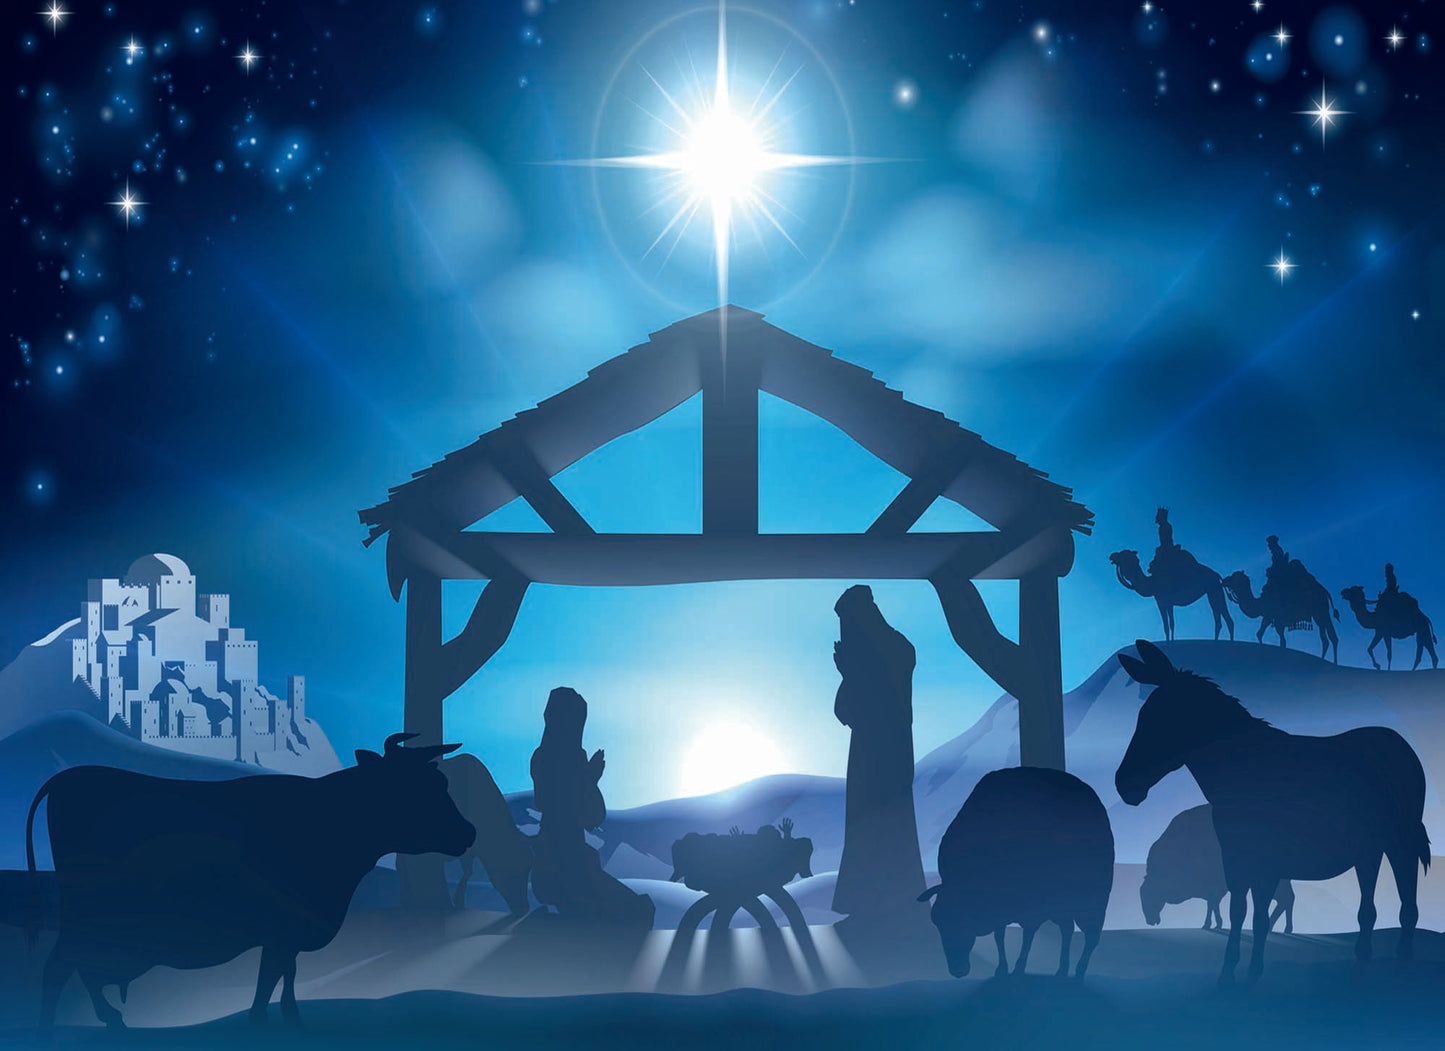 Boxed Christmas Cards - Nativity